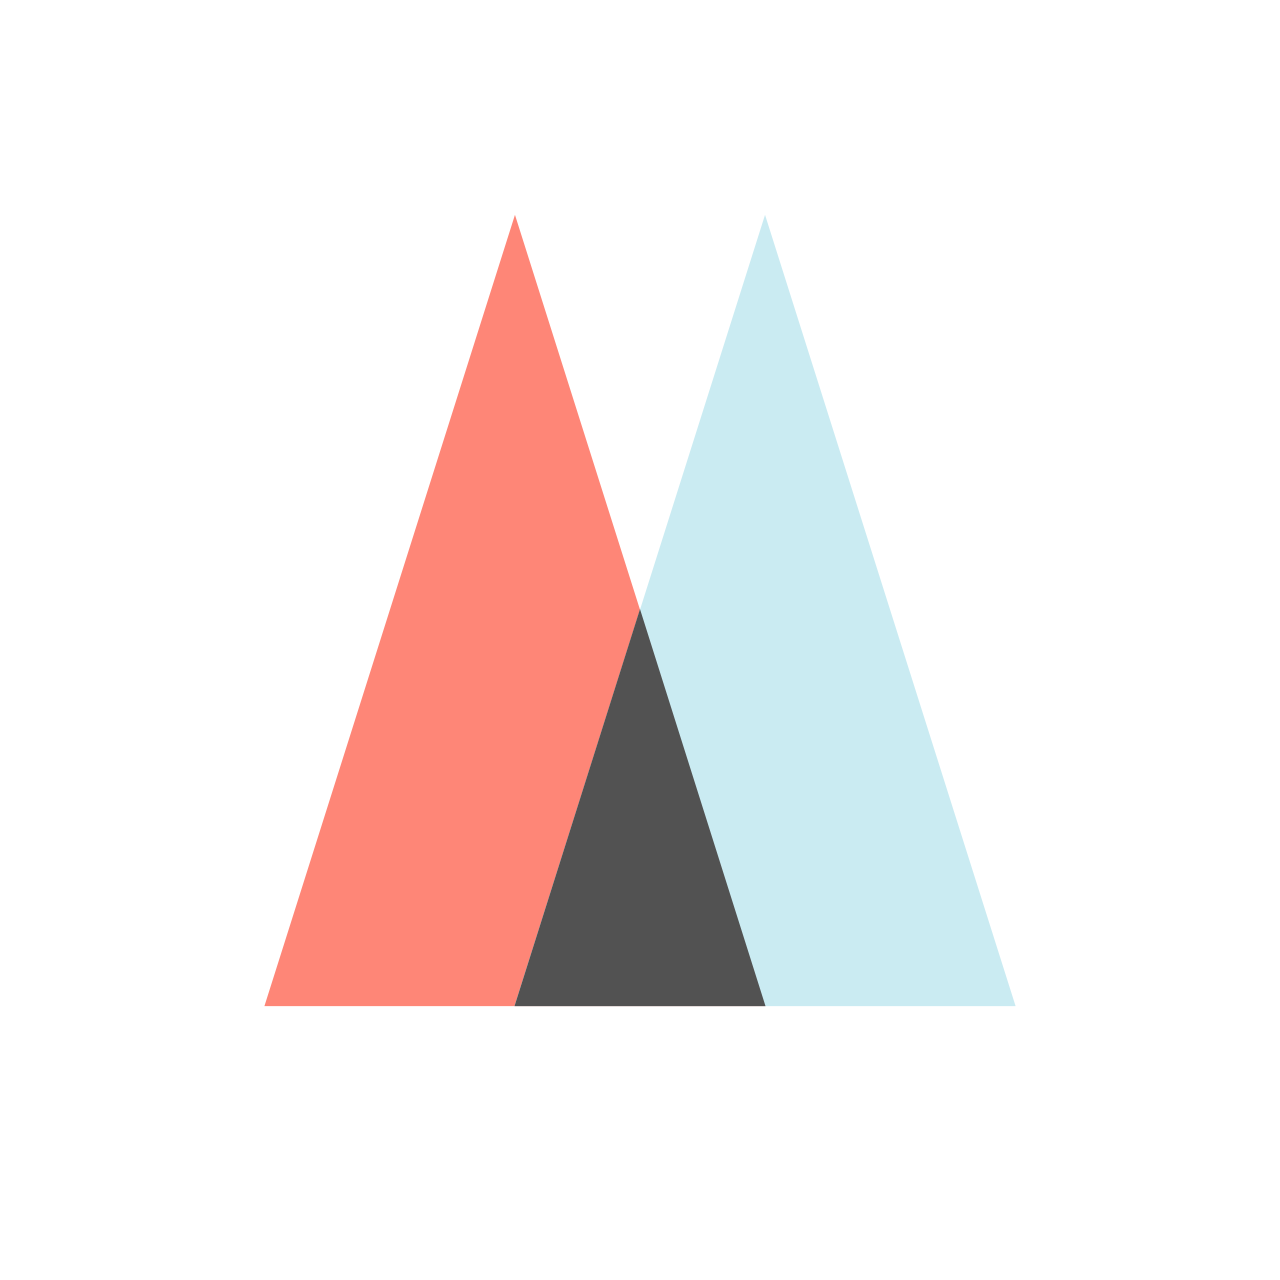 The logo for the Meaningful Entrepreneurship Program: An orange triangle that intersects with a light blue triangle slightly to the right of it. The place where the two triangles intersects forms a smaller, dark gray triangle.